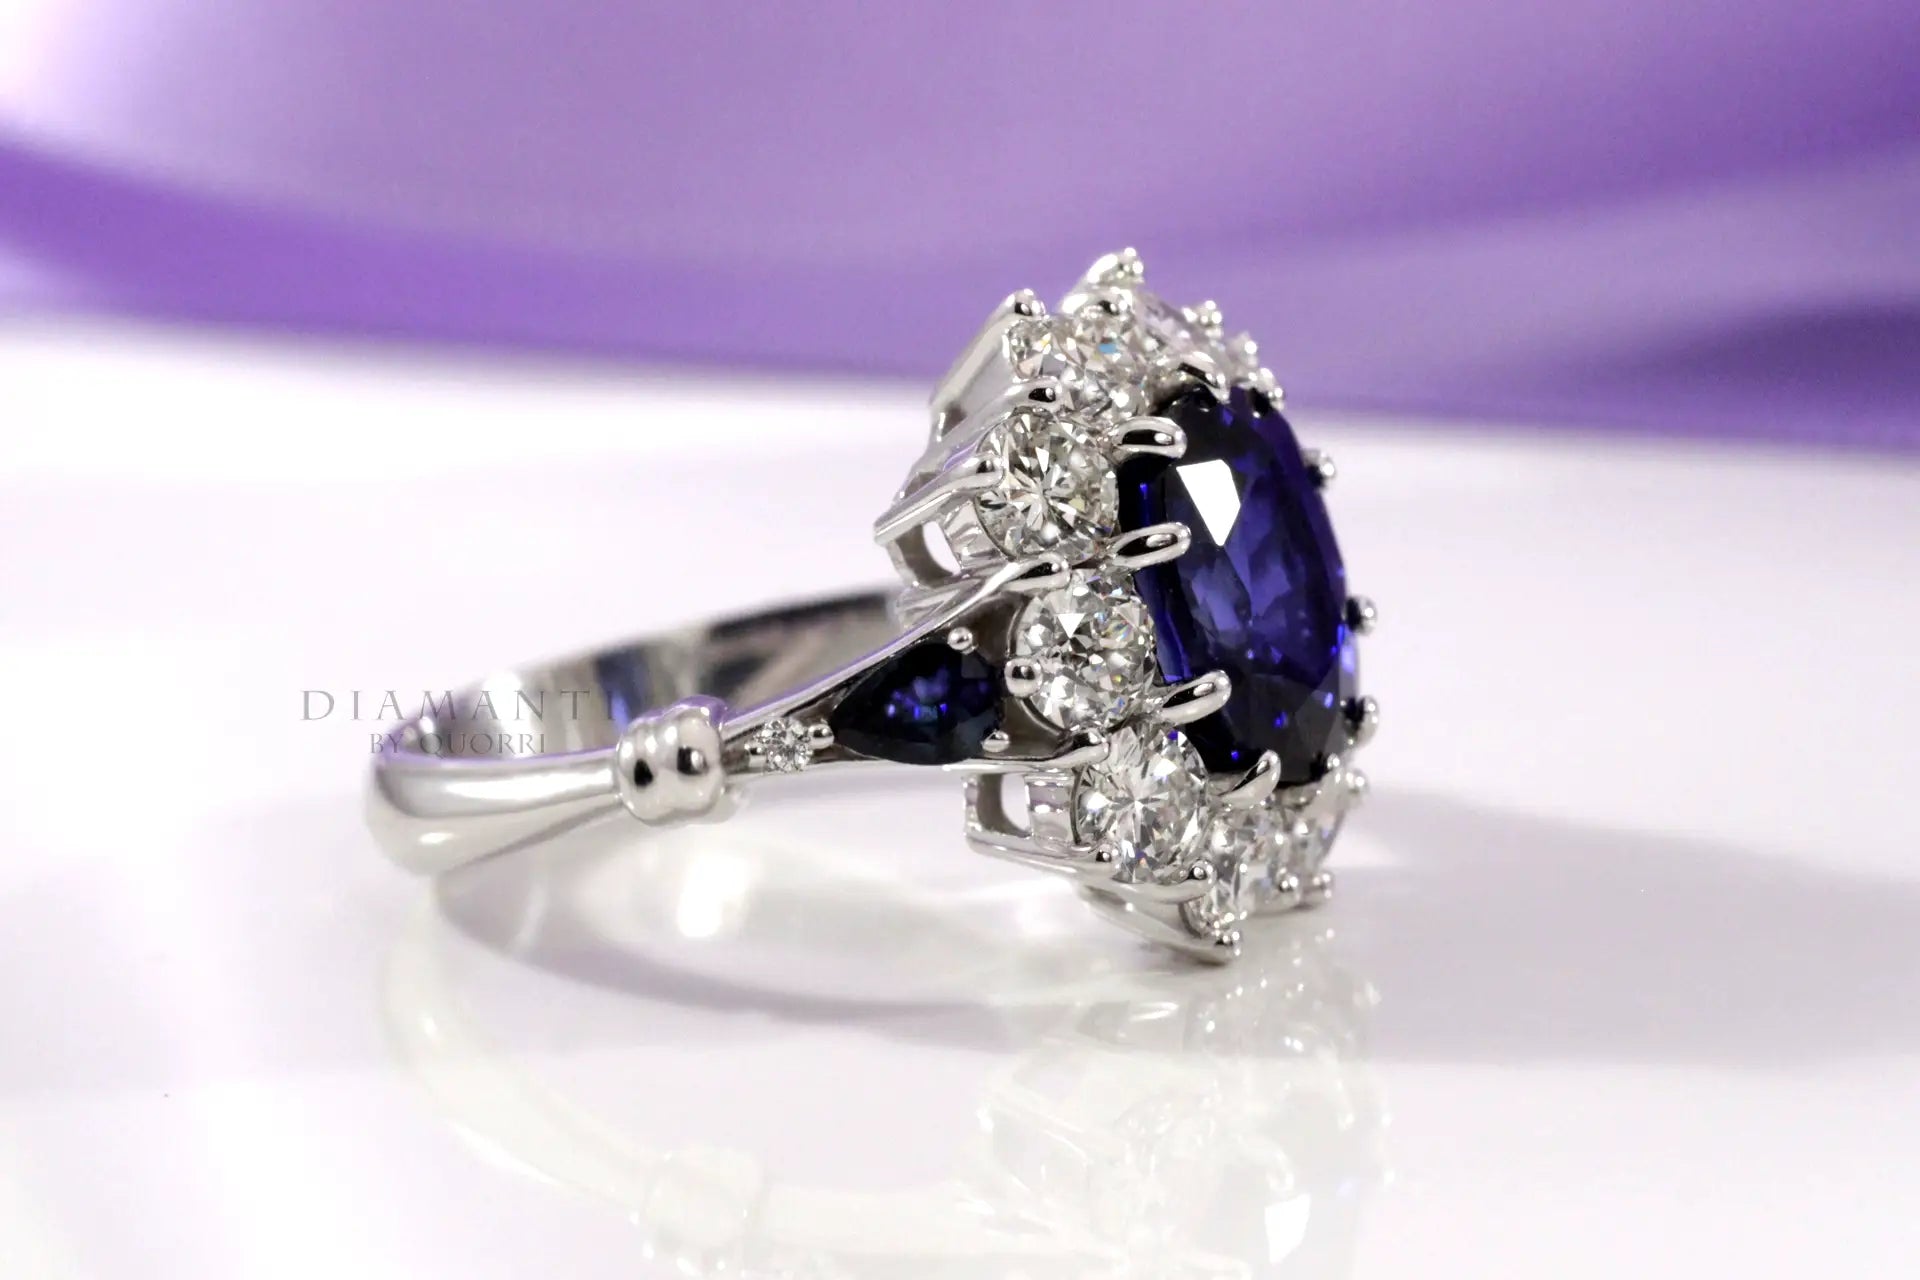 designer diamond halo with oval blue lab grown sapphire center and sides engagement ring Quorri